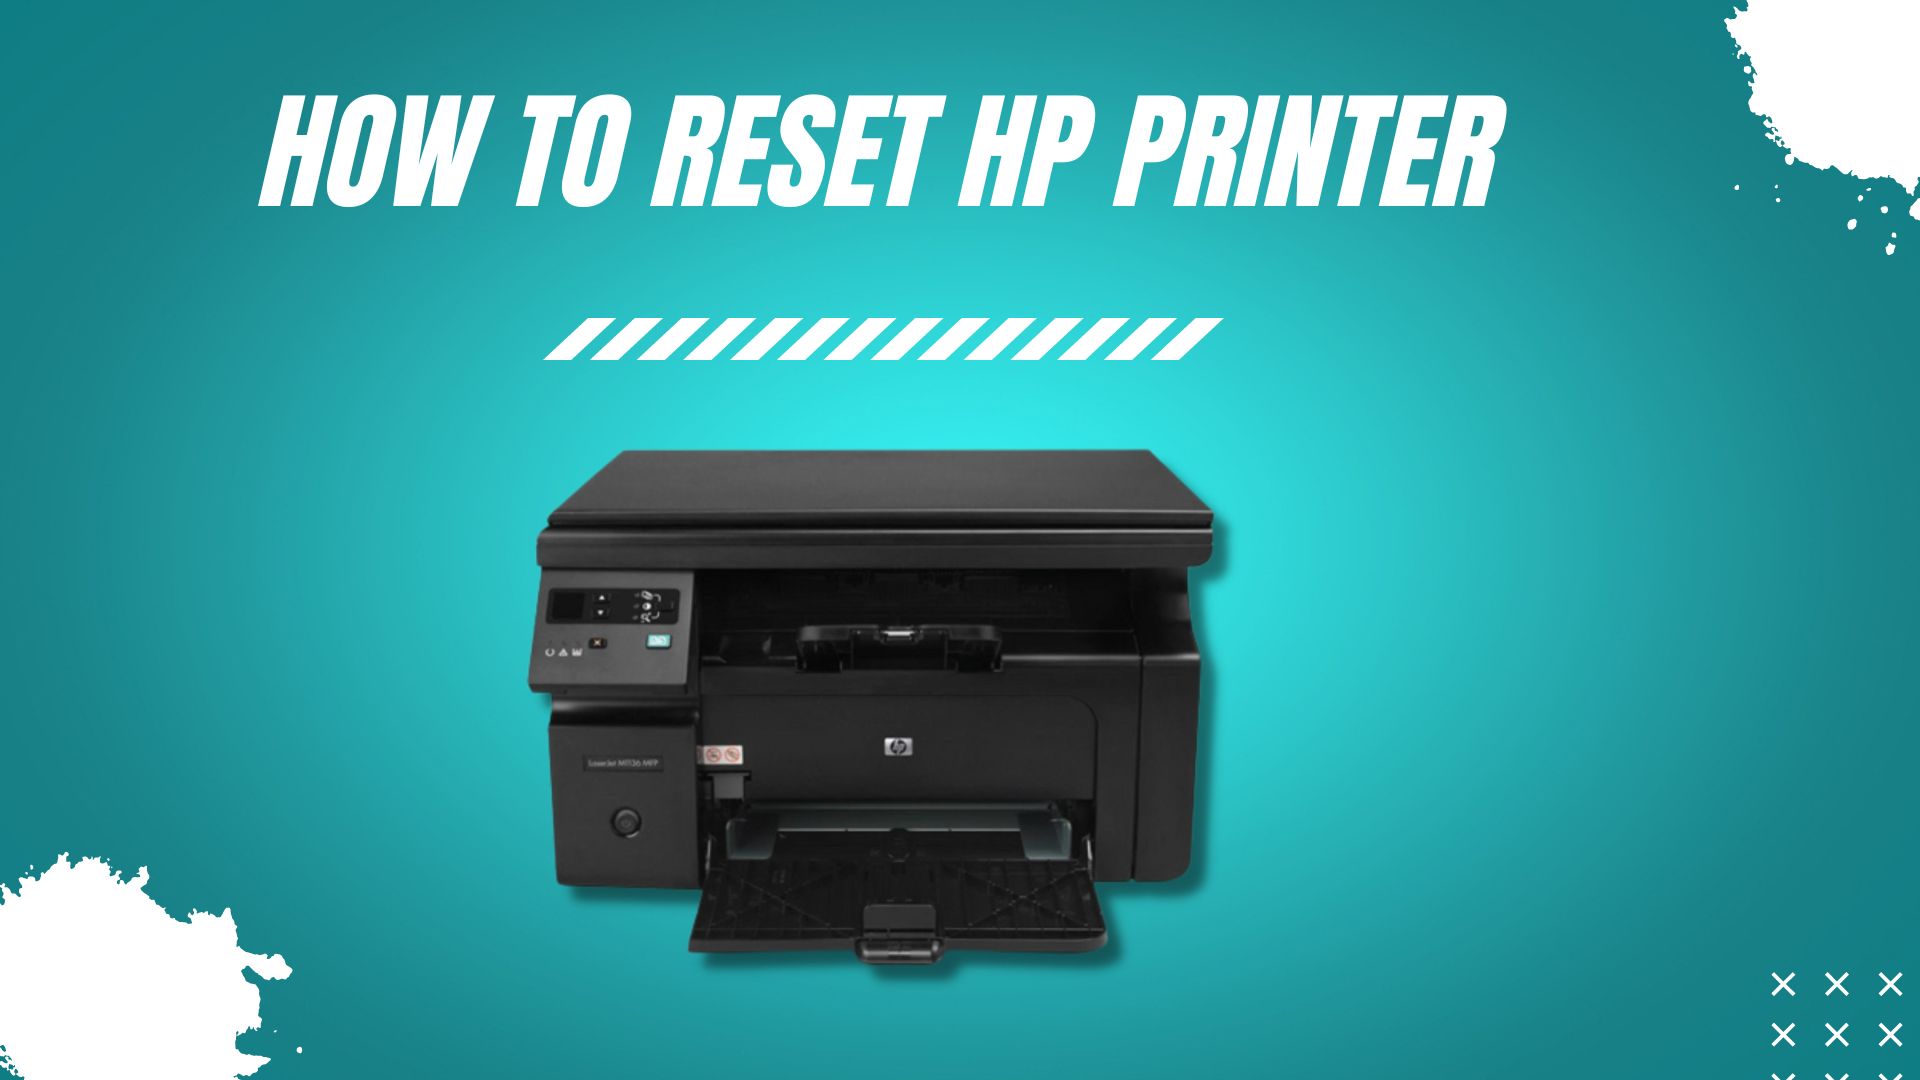 How to reset HP printer